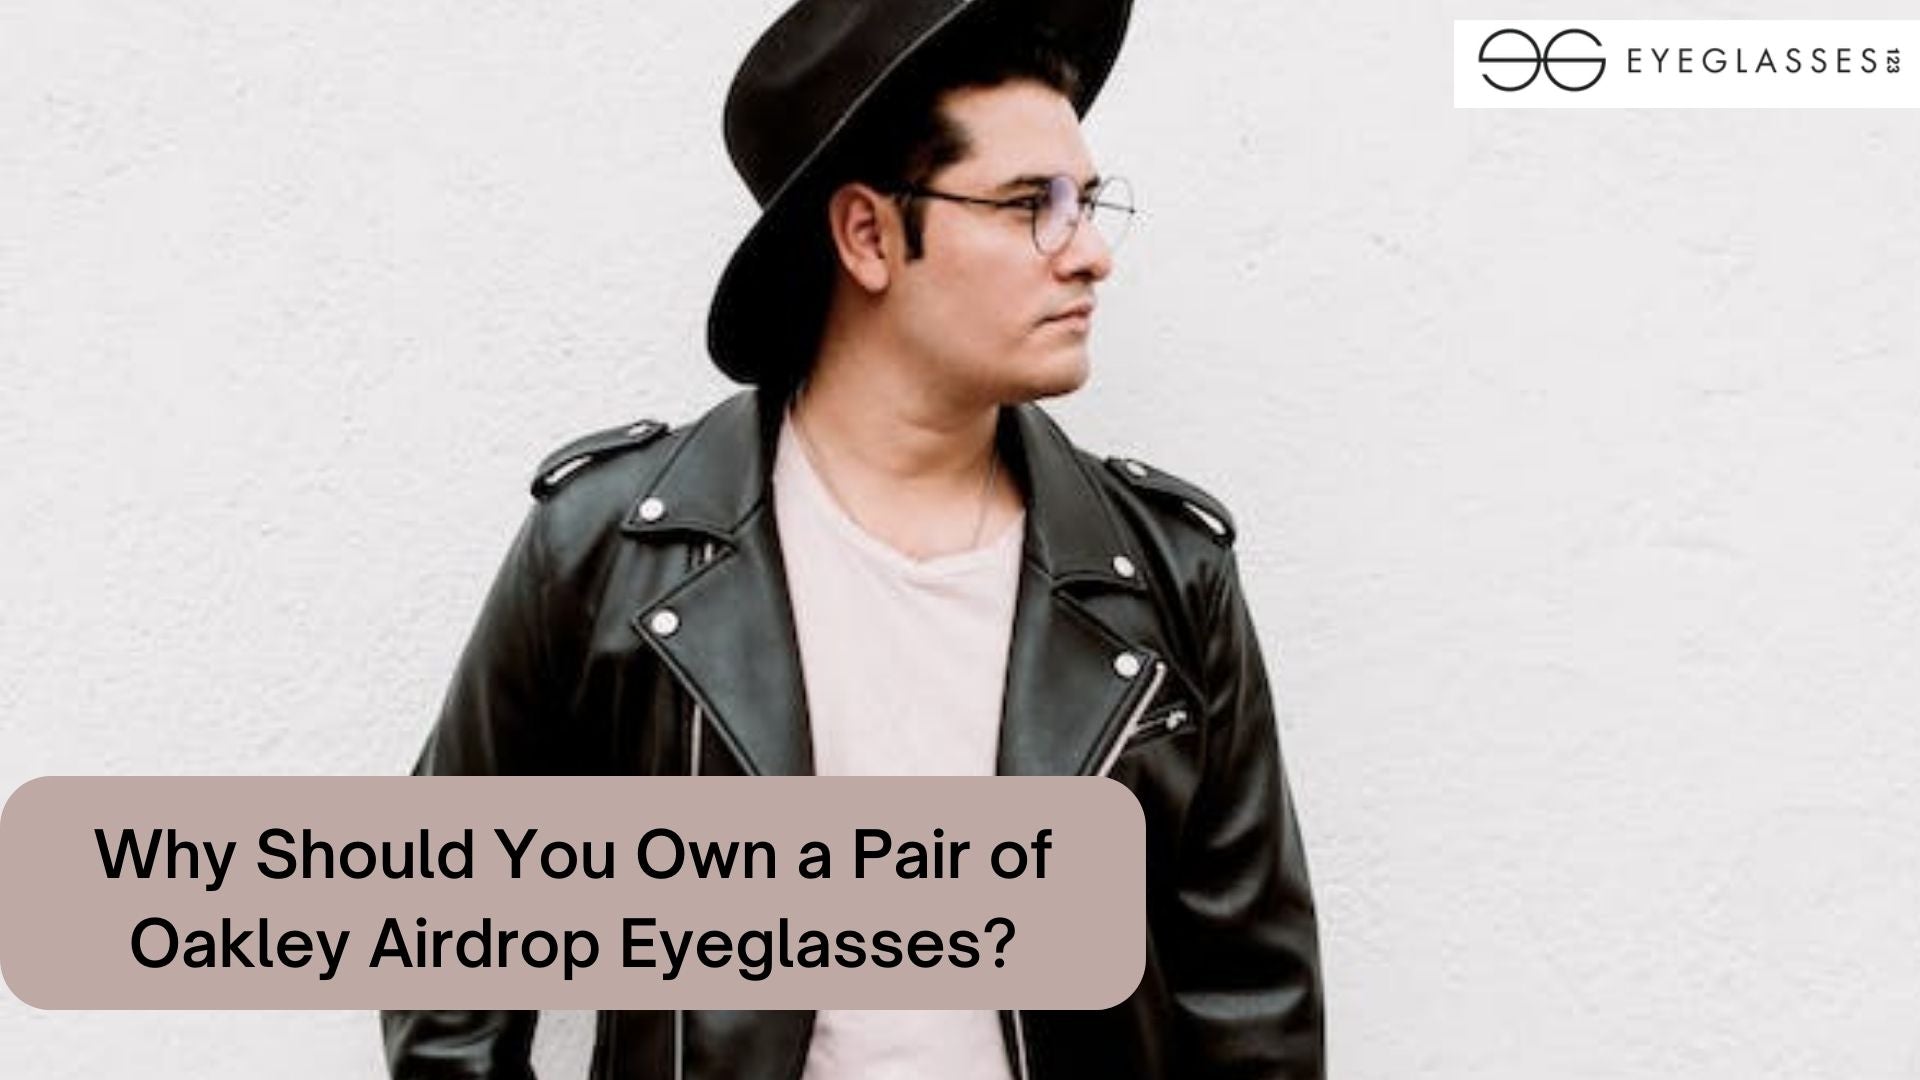 Why Should You Own a Pair of Oakley Airdrop Eyeglasses?